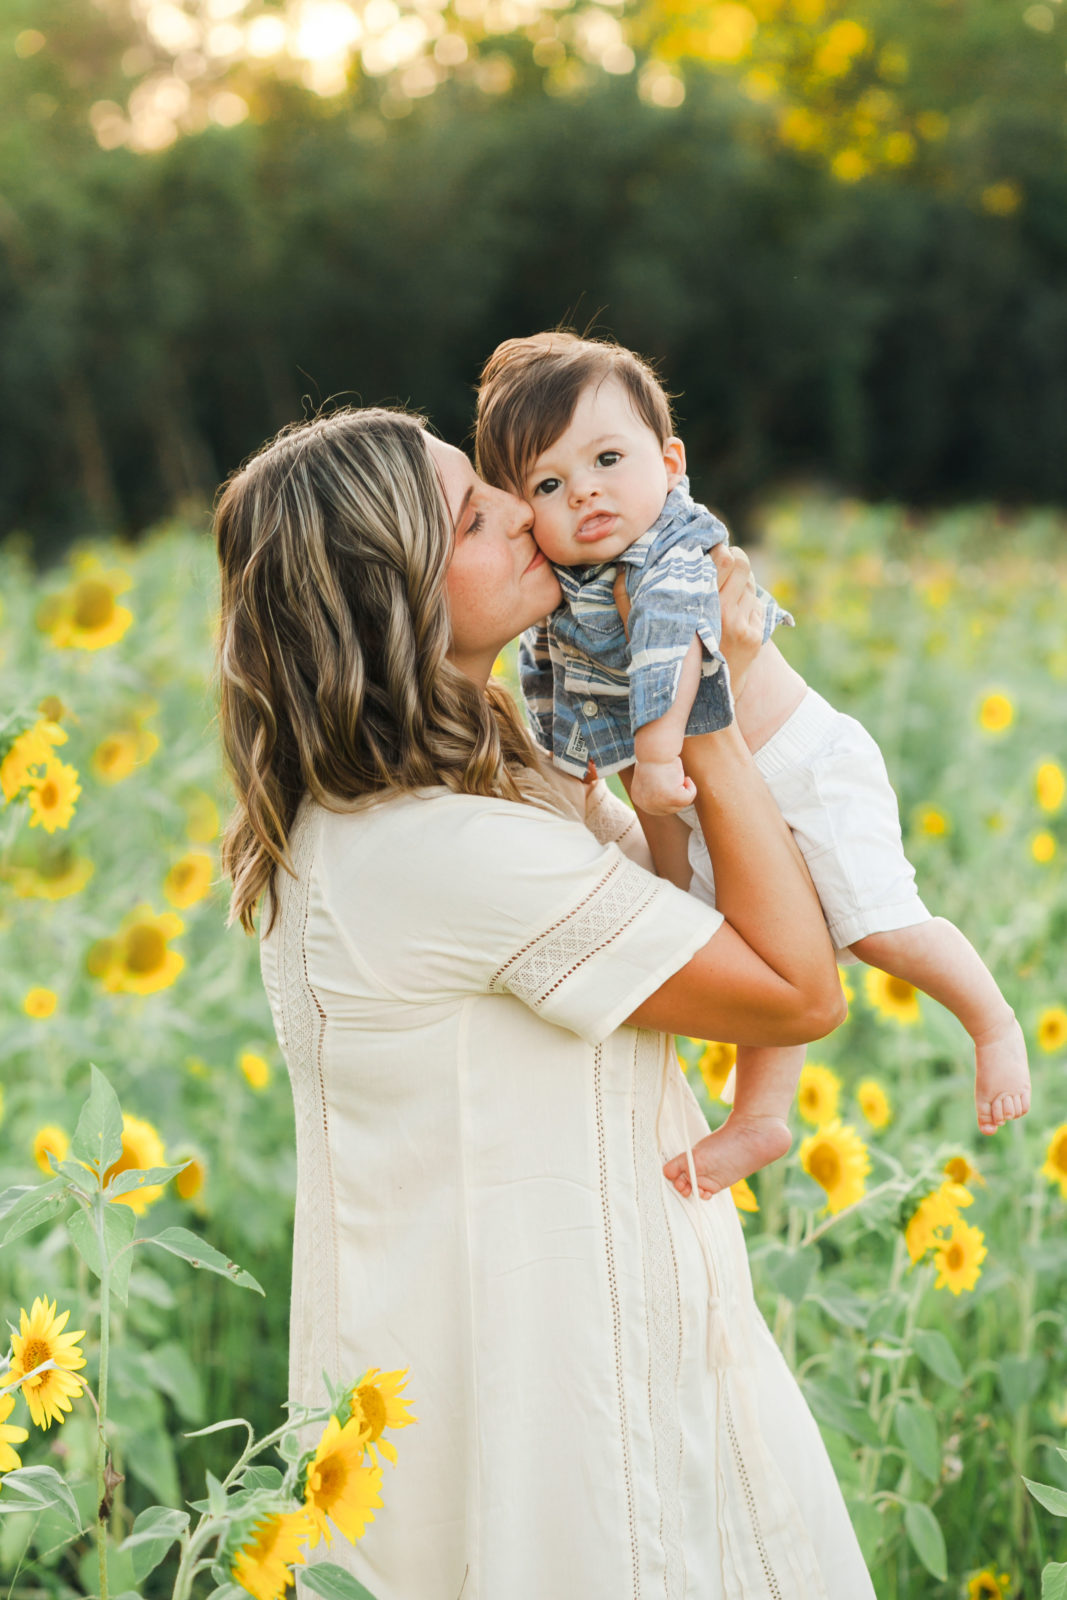 Summertime Family Photos in Sunflower Fields - janetdphotography.com